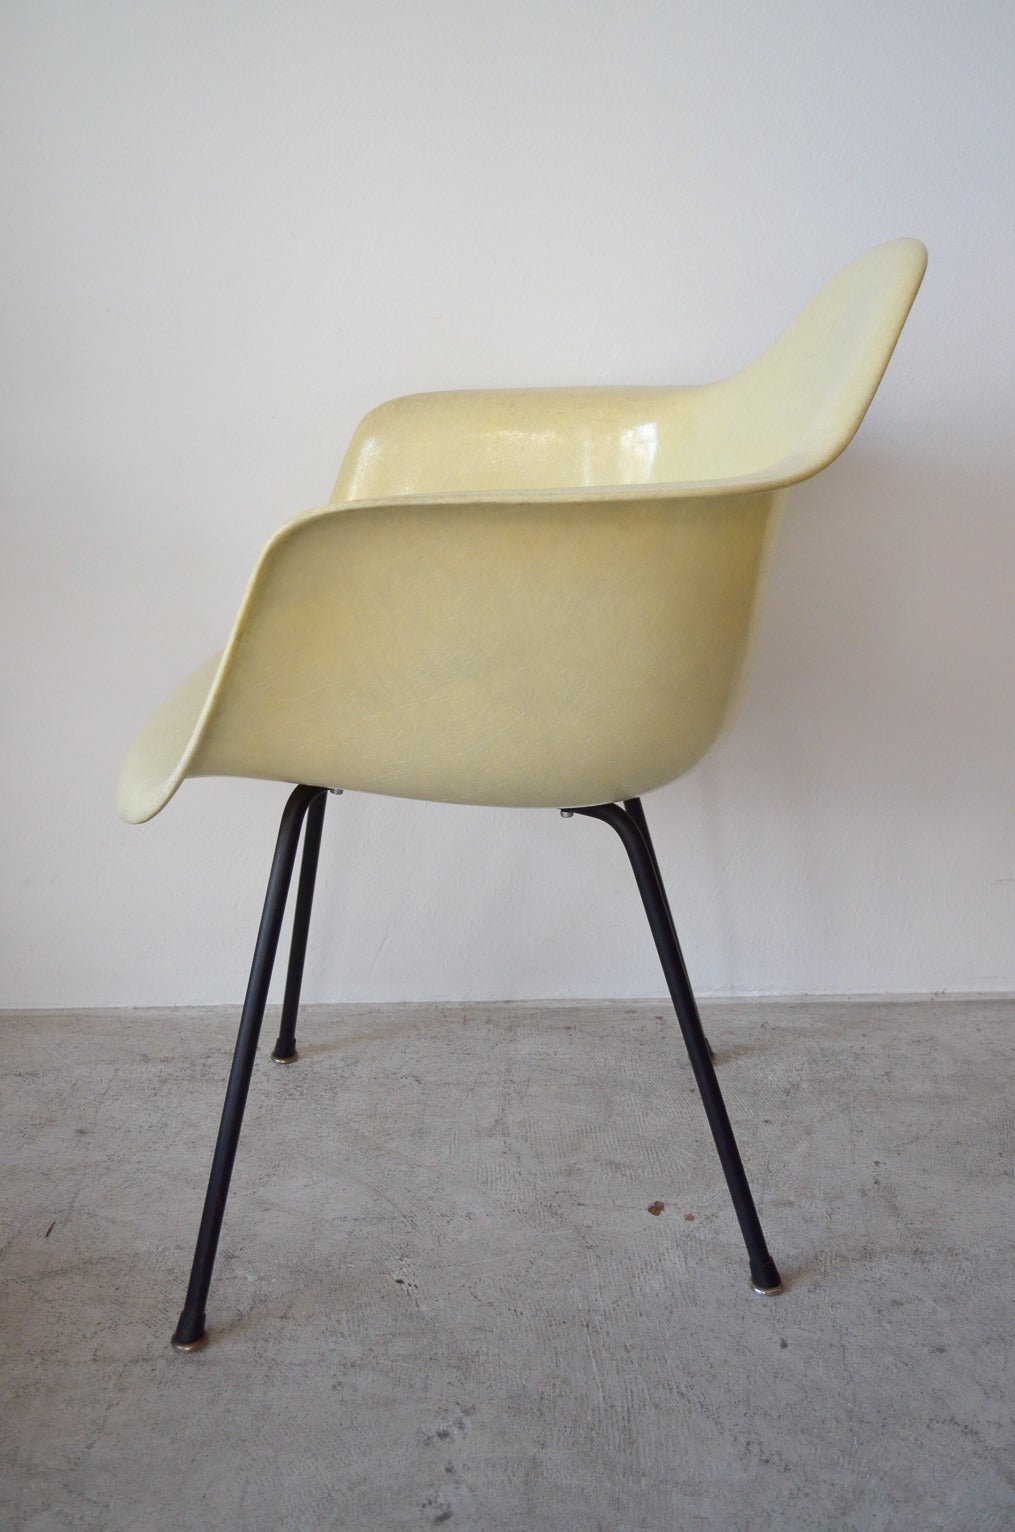 First Generation Charles Eames Rope Edge DAX Armchair with early Herman Miller checkerboard label.  Excellent overall condition, no rust.  Early X base, great fiber detail.

HEIGHT:	30 in. (76 cm)
WIDTH:	24 in. (61 cm)
DEPTH:	23 in. (58